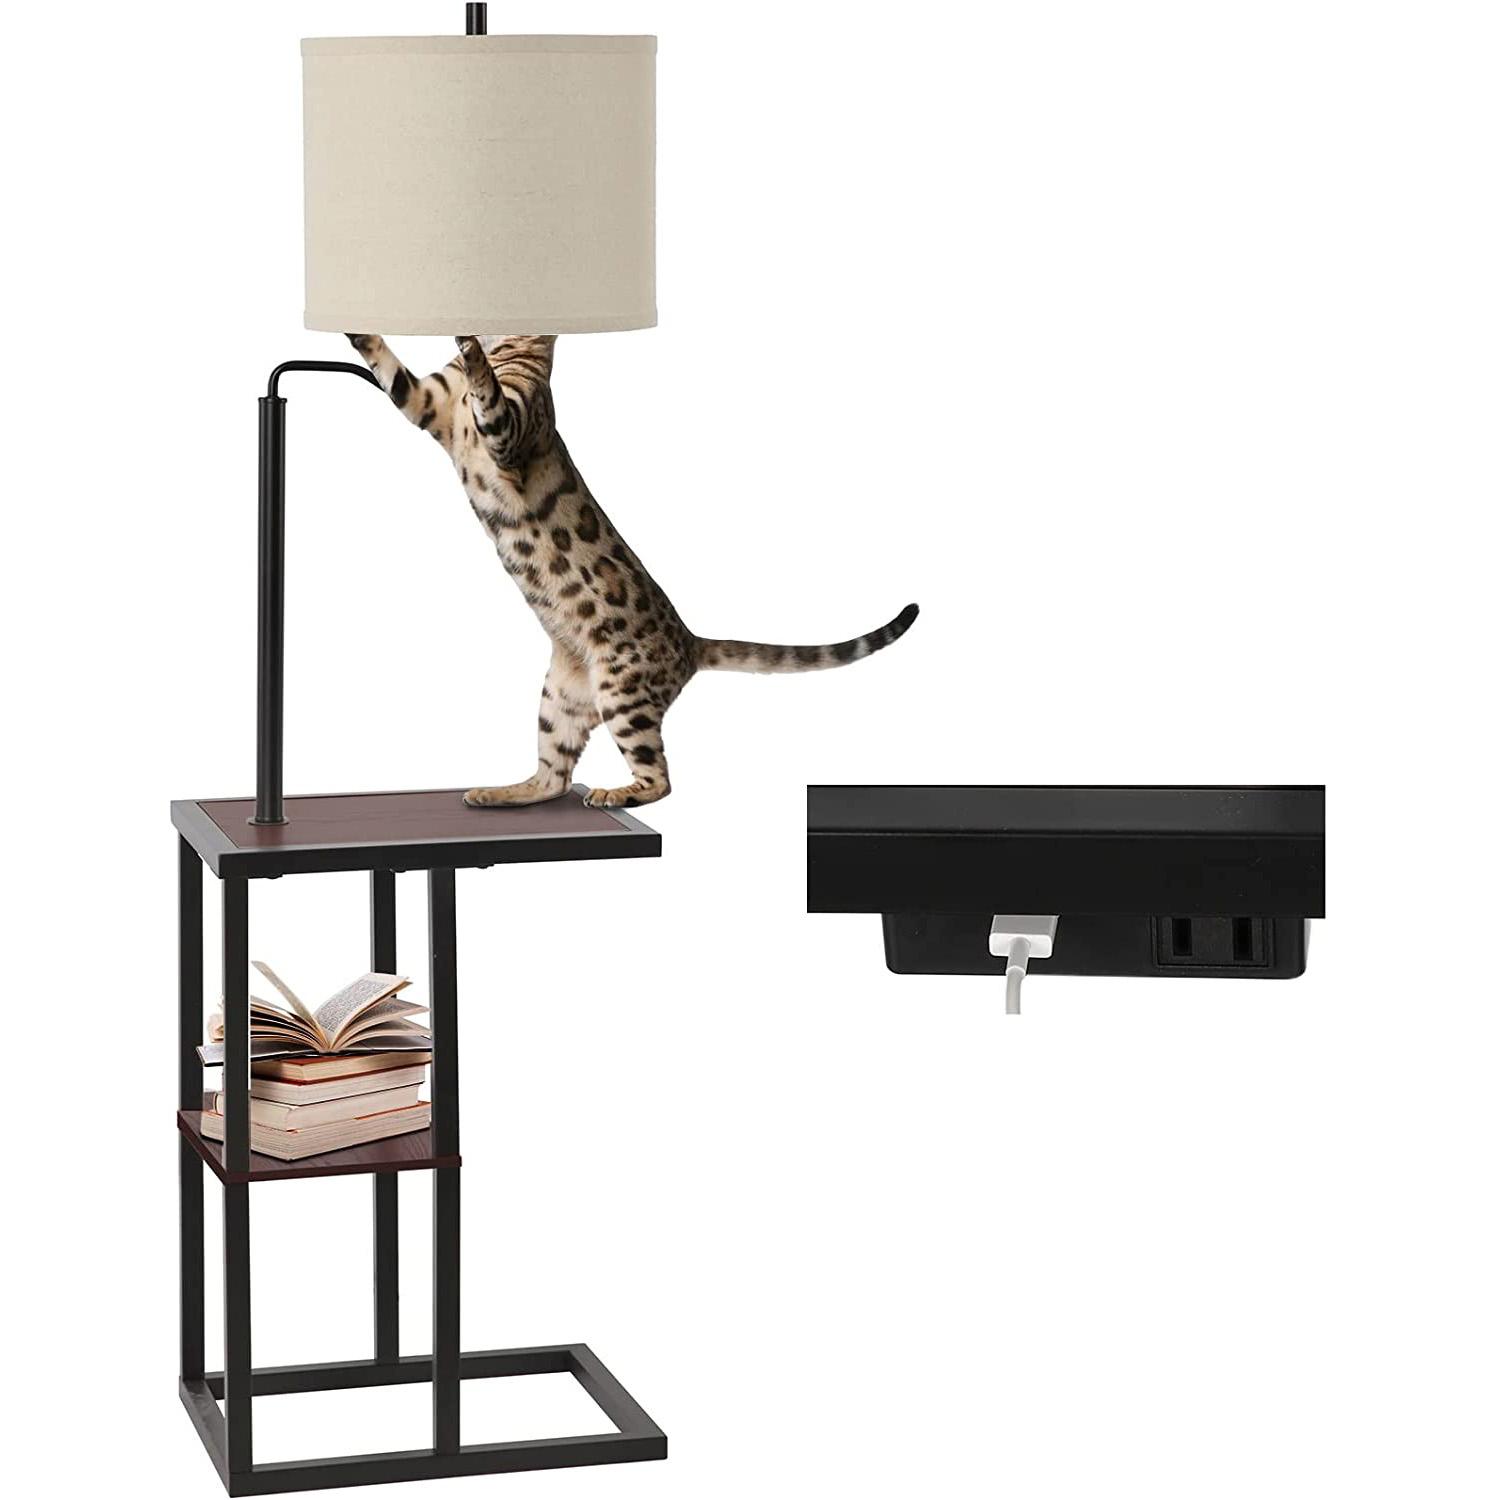 Hykolity Floor Lamp with End Table and USB Charging for $29.99 Shipped